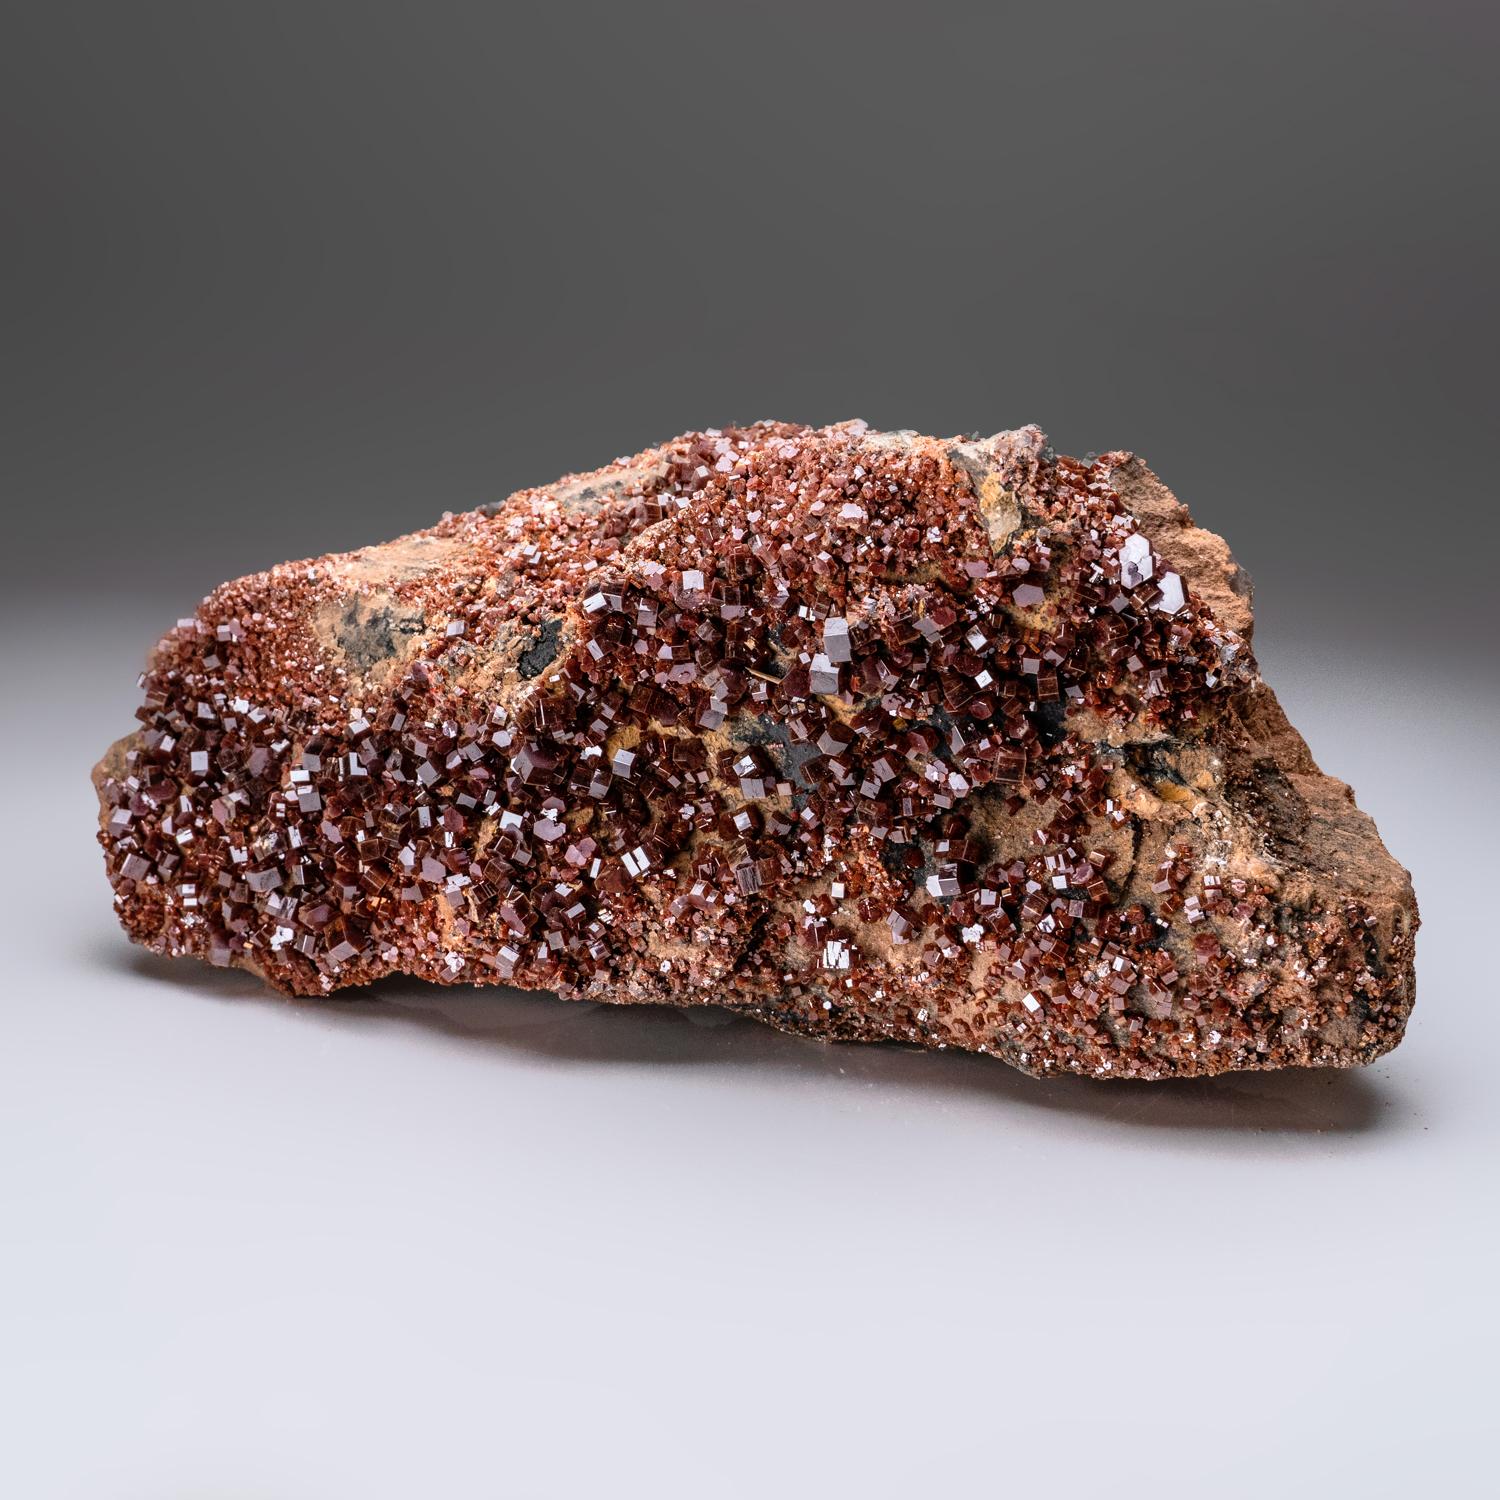 From Mibladen, Atlas Mountains, Khénifra Province, Morocco

An exceptional cluster of hexagonal crystals of bright red Vanadinites. This specimen has glassy luster with barite on brown Gossan matrix. Large well-defined and undamaged crystals, fully